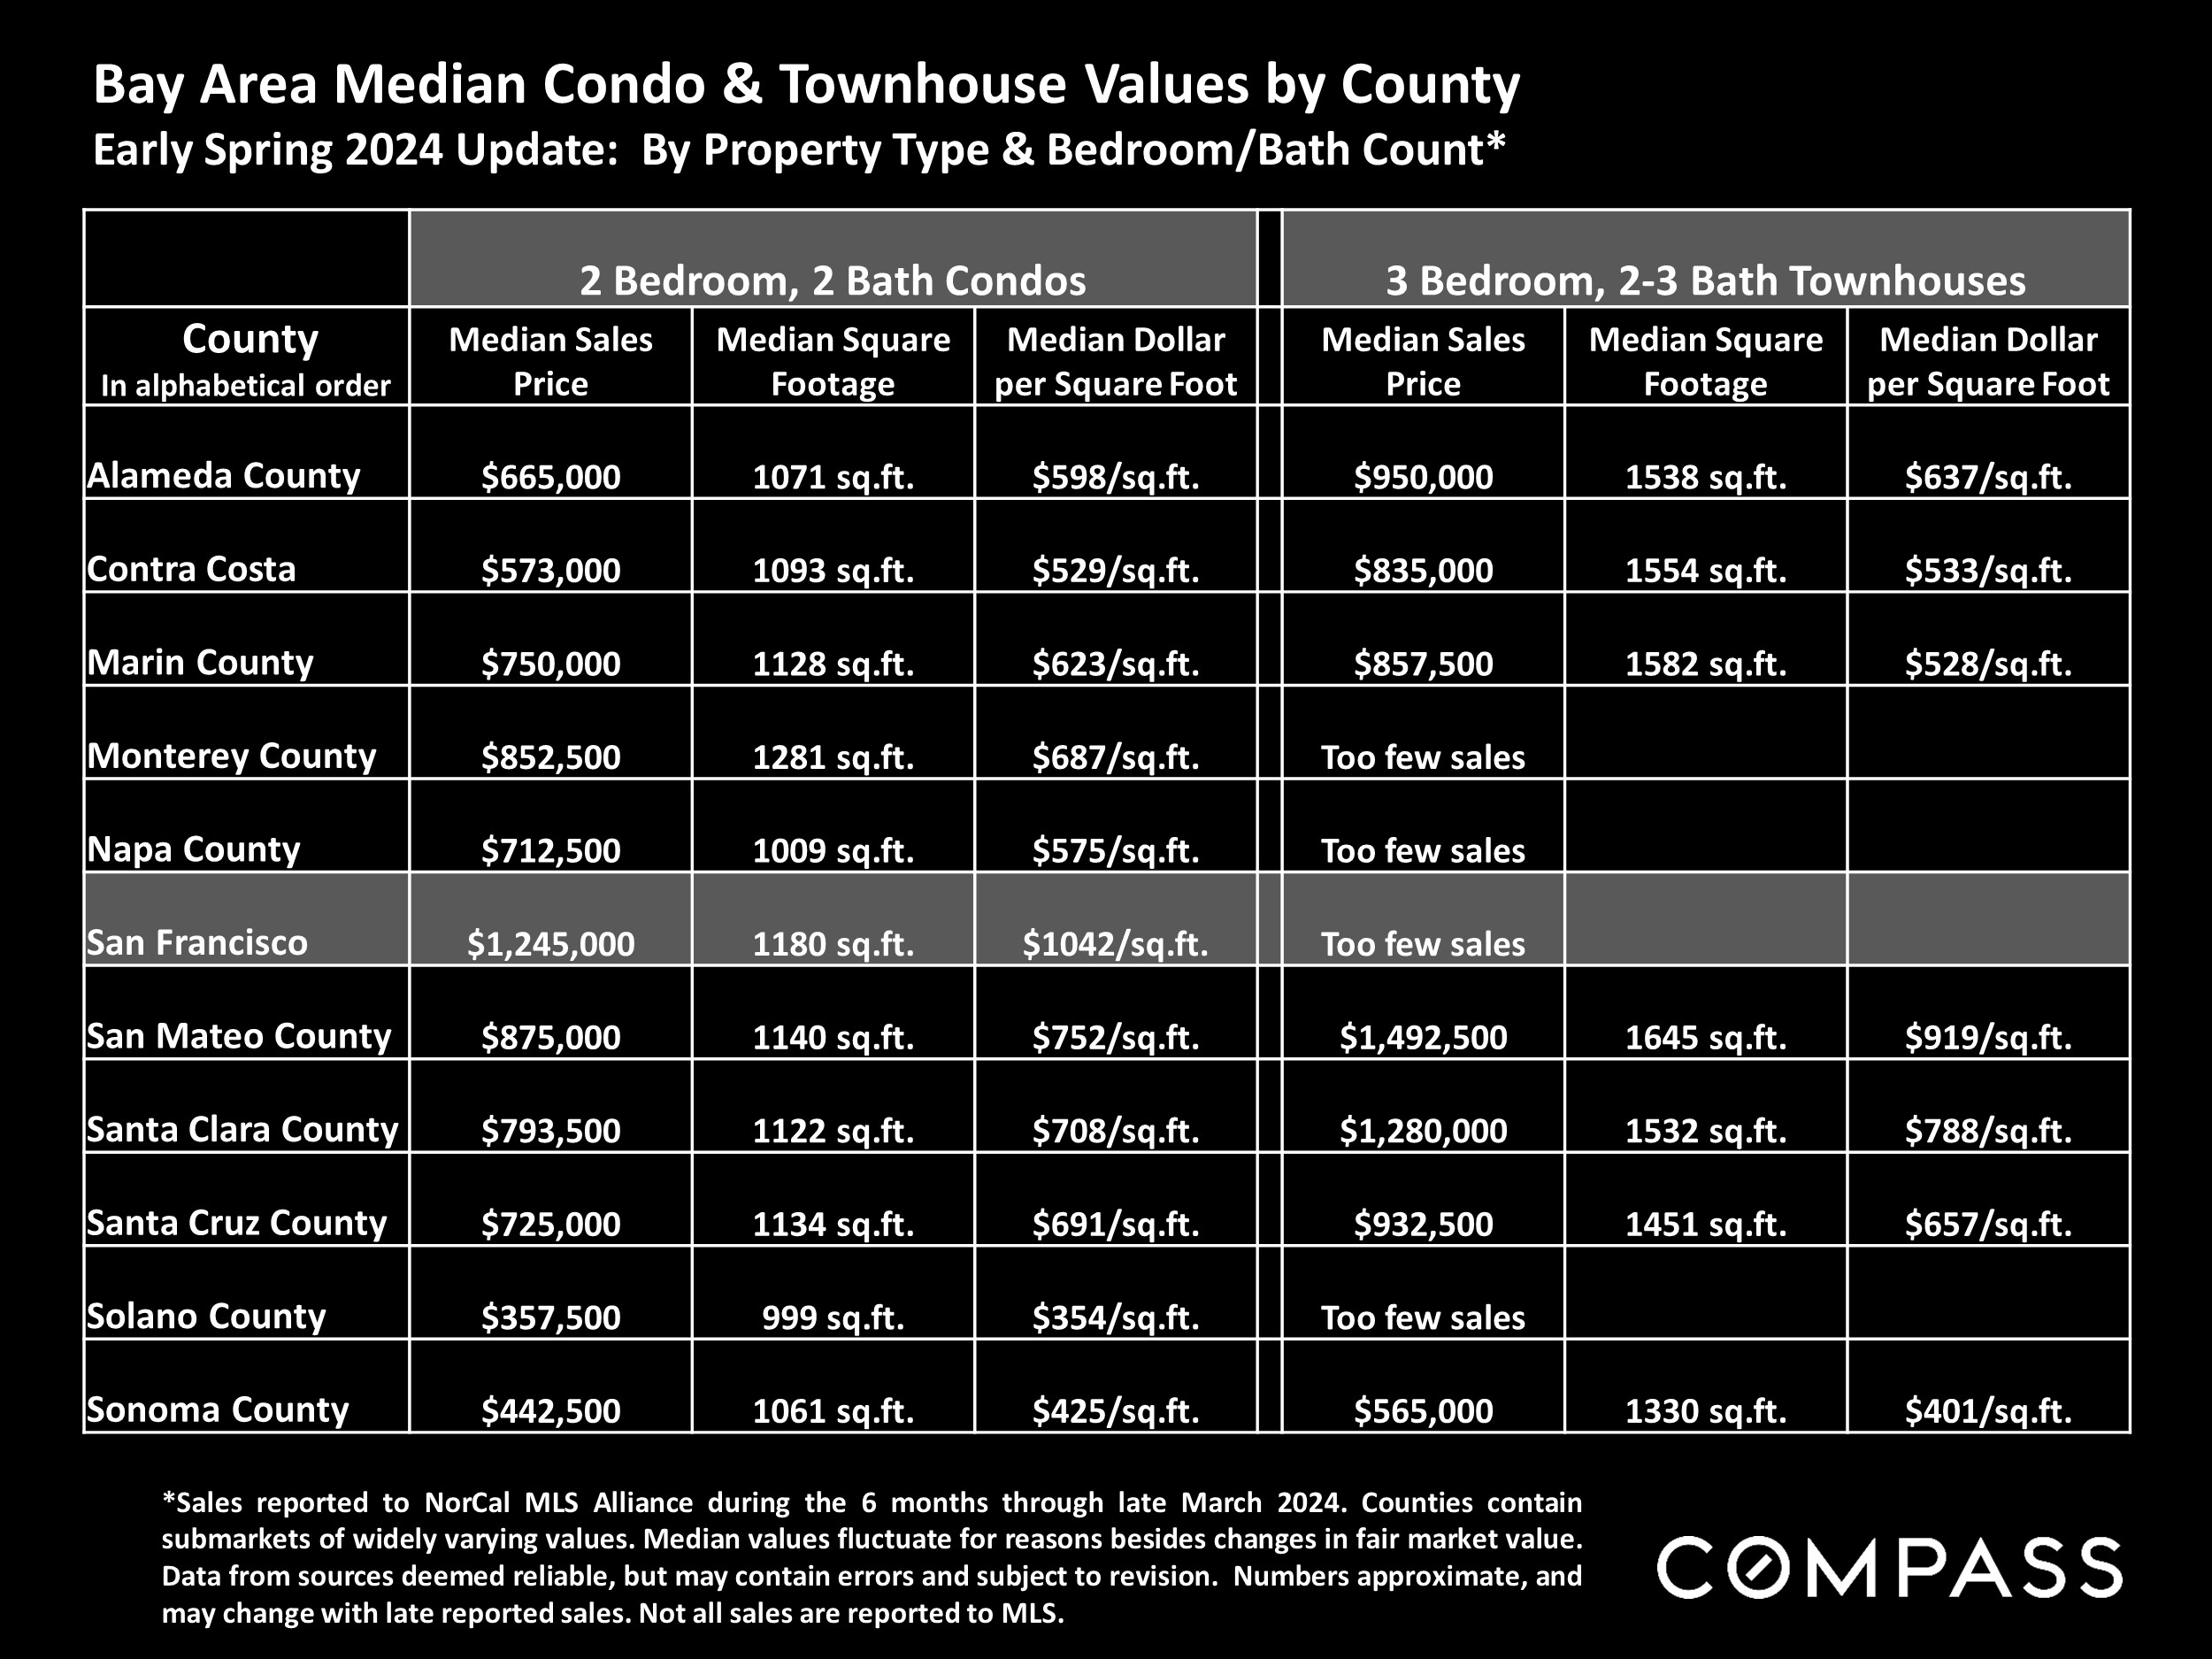 Bay Area Median Condo & Townhouse Values by County Early Spring 2024 Update: By Property Type & Bedroom/Bath Count*